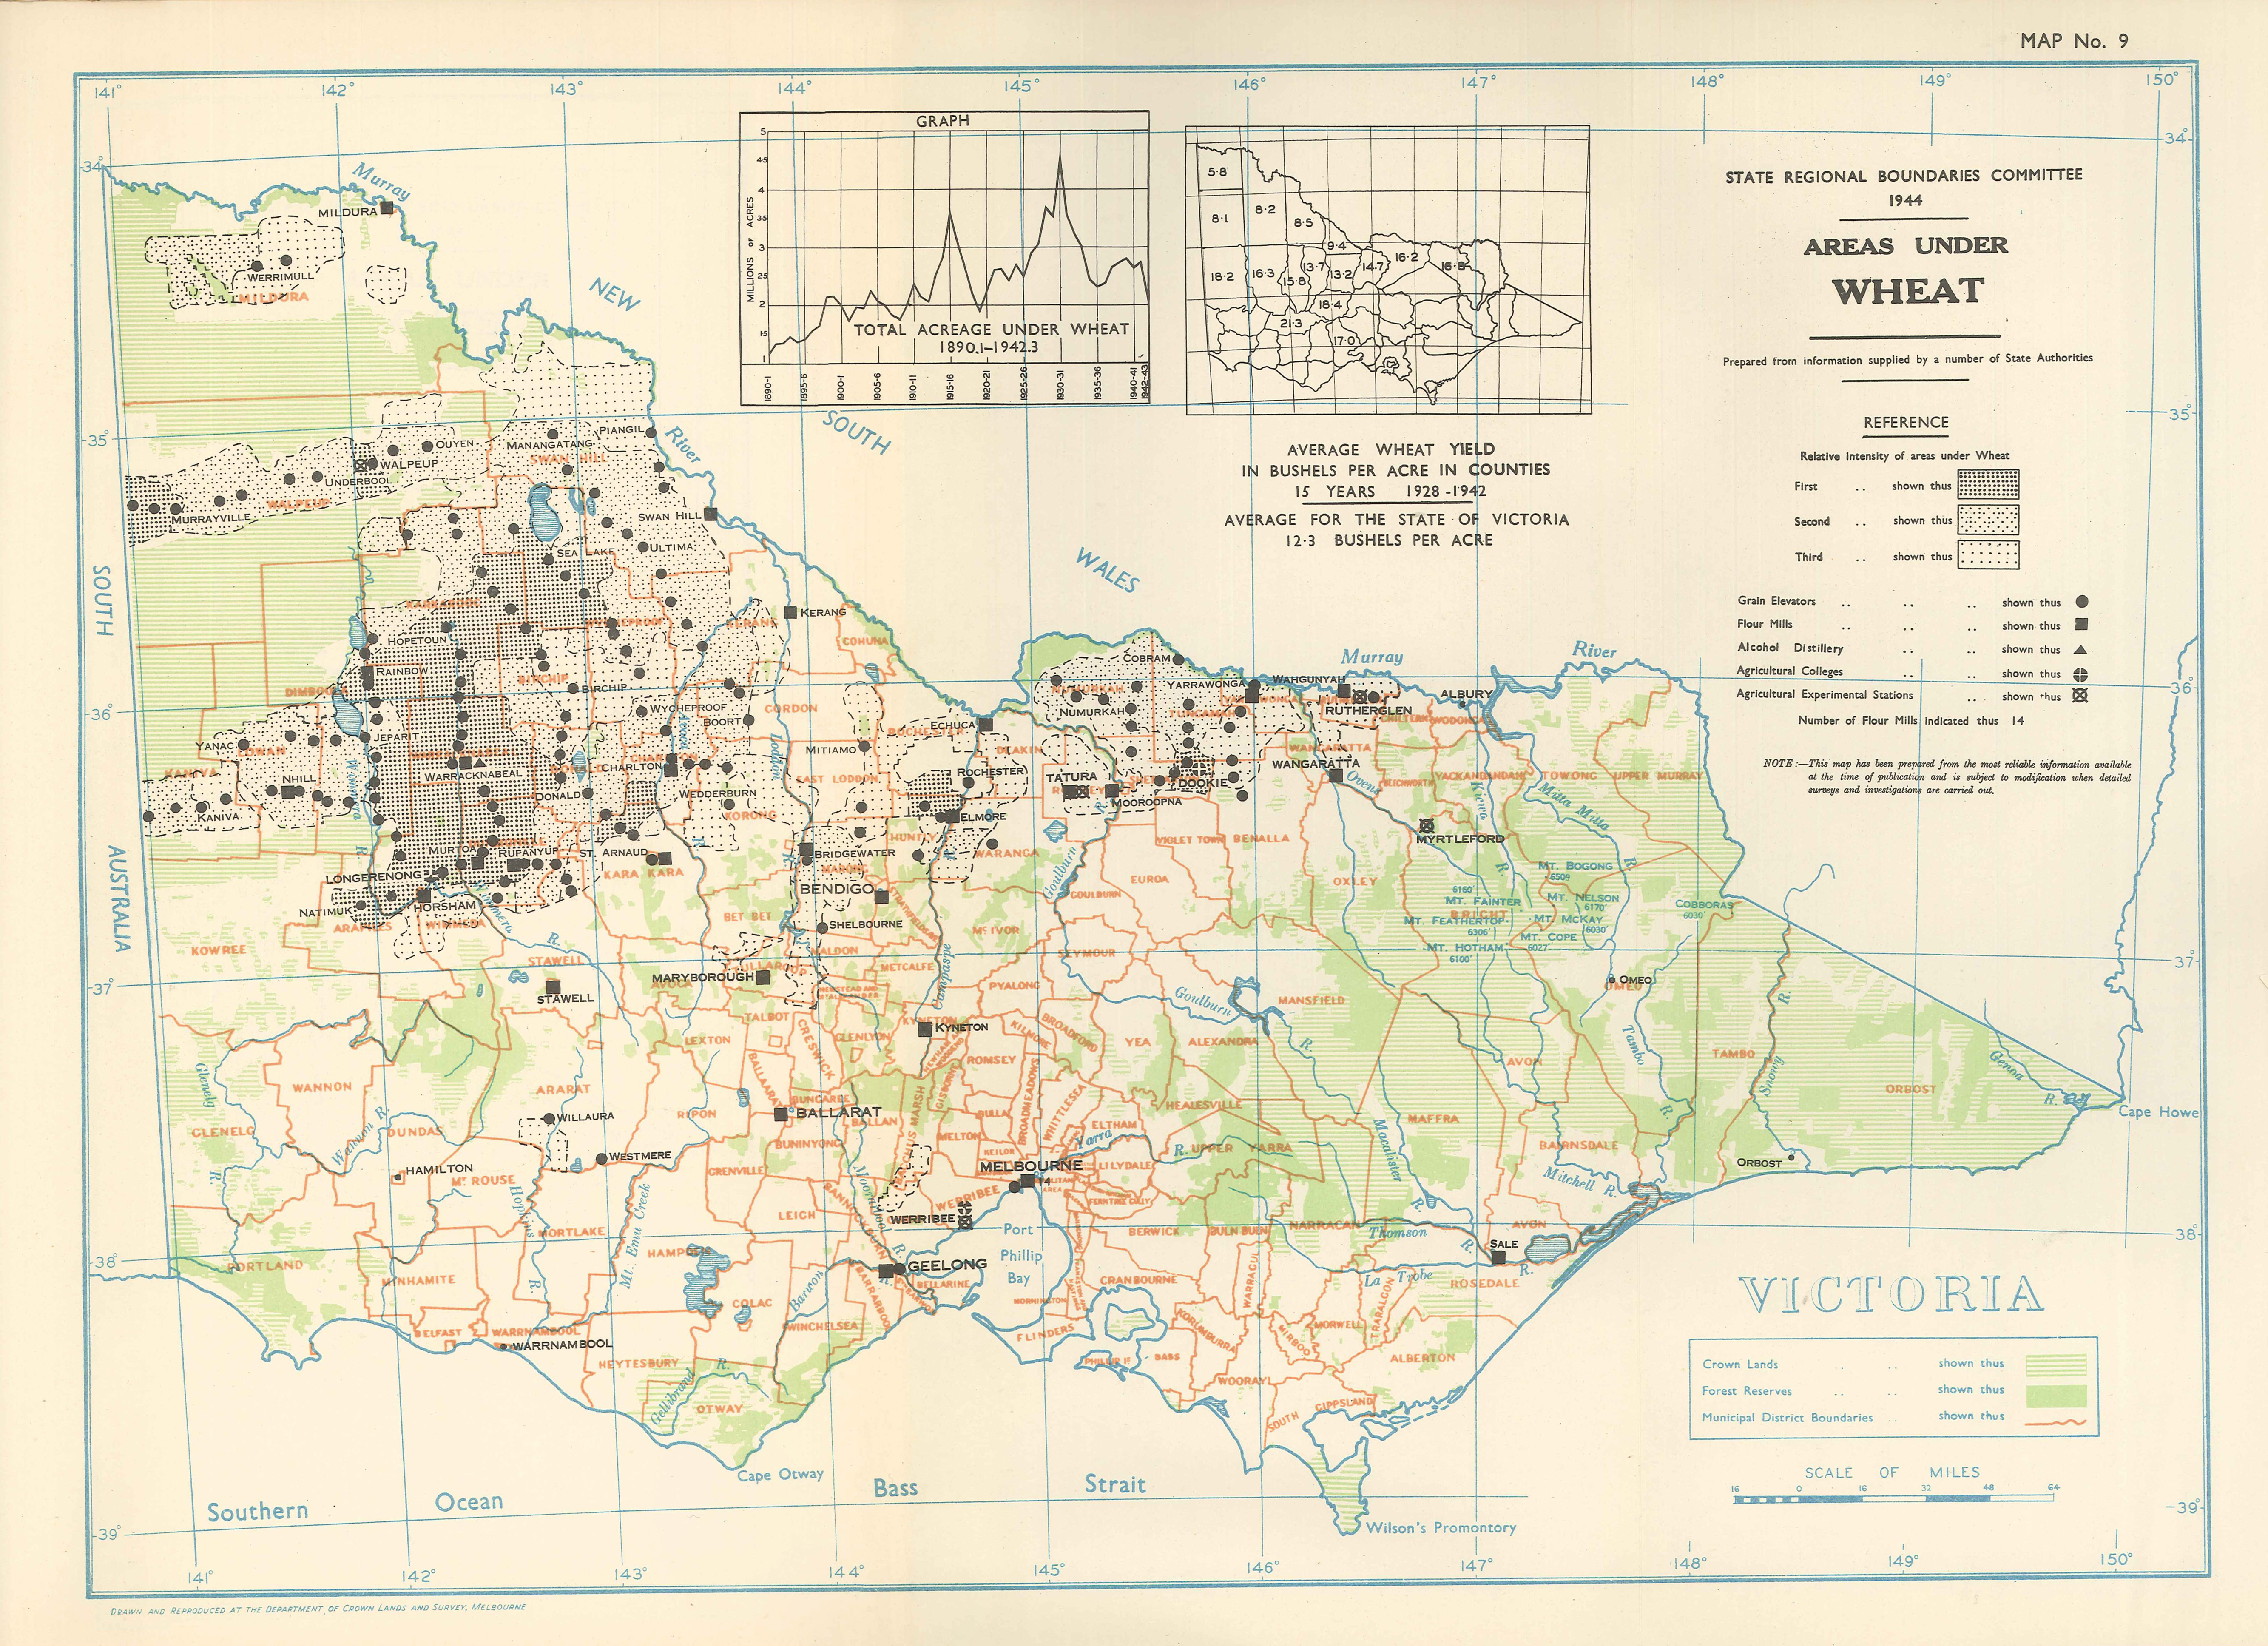 map showing area under wheat in 1944